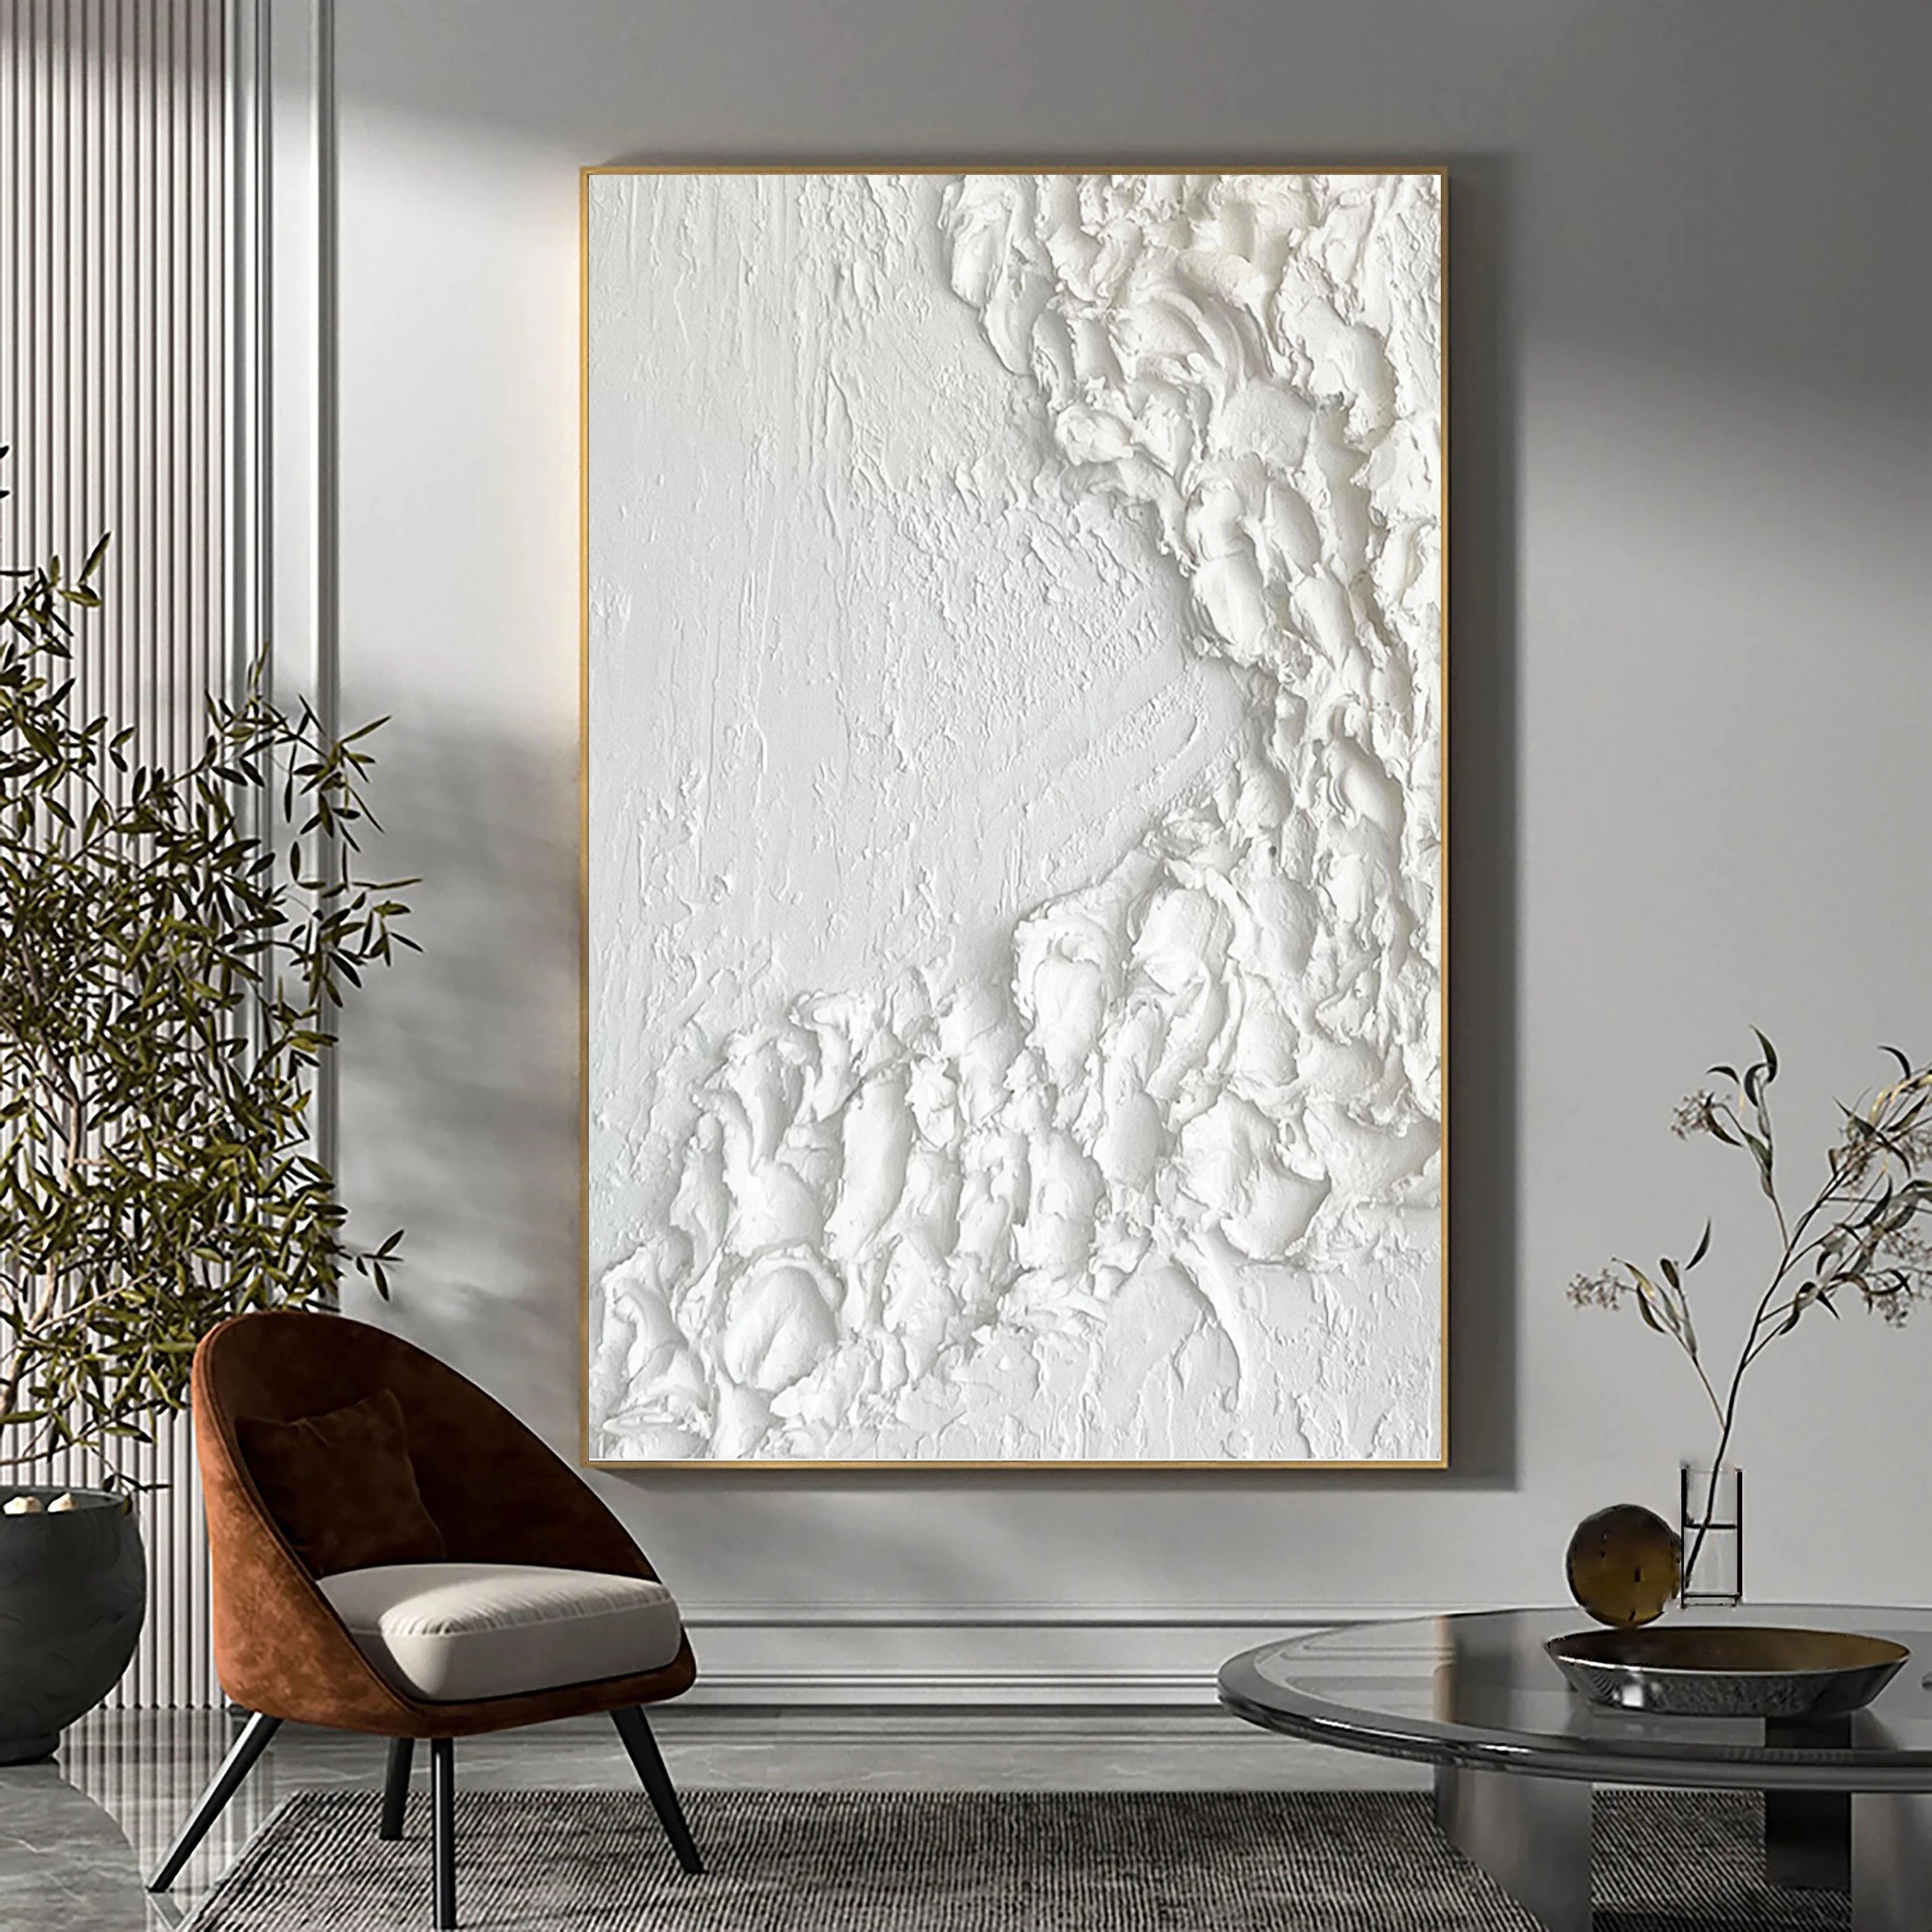 Large White 3D Minimalist Abstract Handcrafted Painting, 3D Thick Texture Wall Art/Home Decor